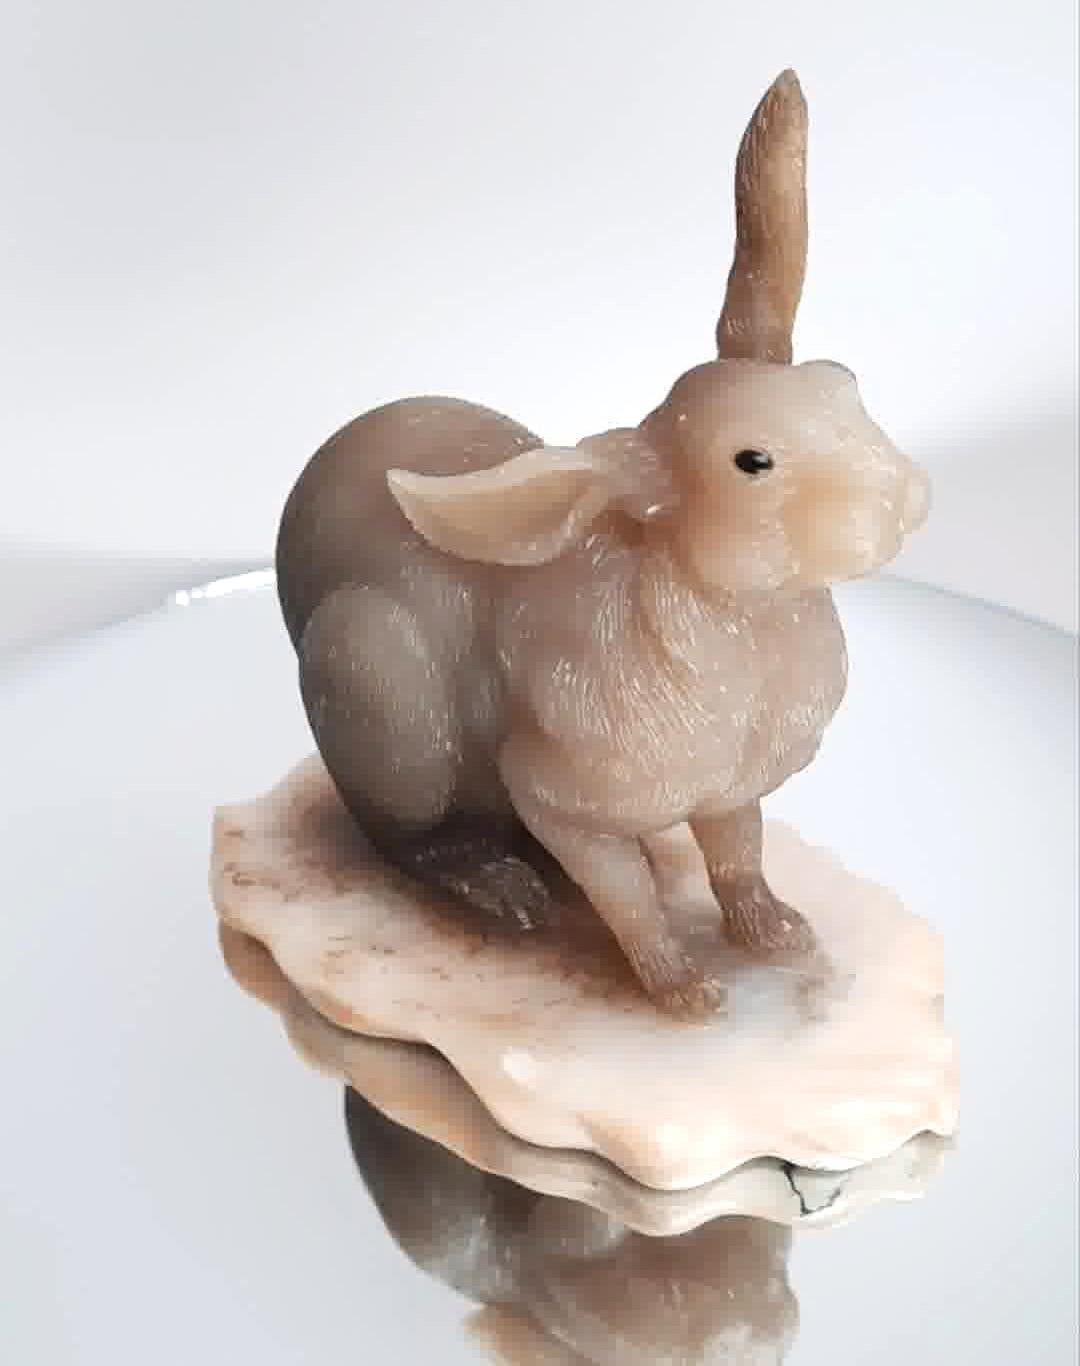 Snowy white rabbits are on the way to celebrate the year of the rabbit 2023. Fond by many cultures for its adorable features, swift move, and spiritual meanings of good luck and the new beginning, the rabbit plays an important role in many fairy